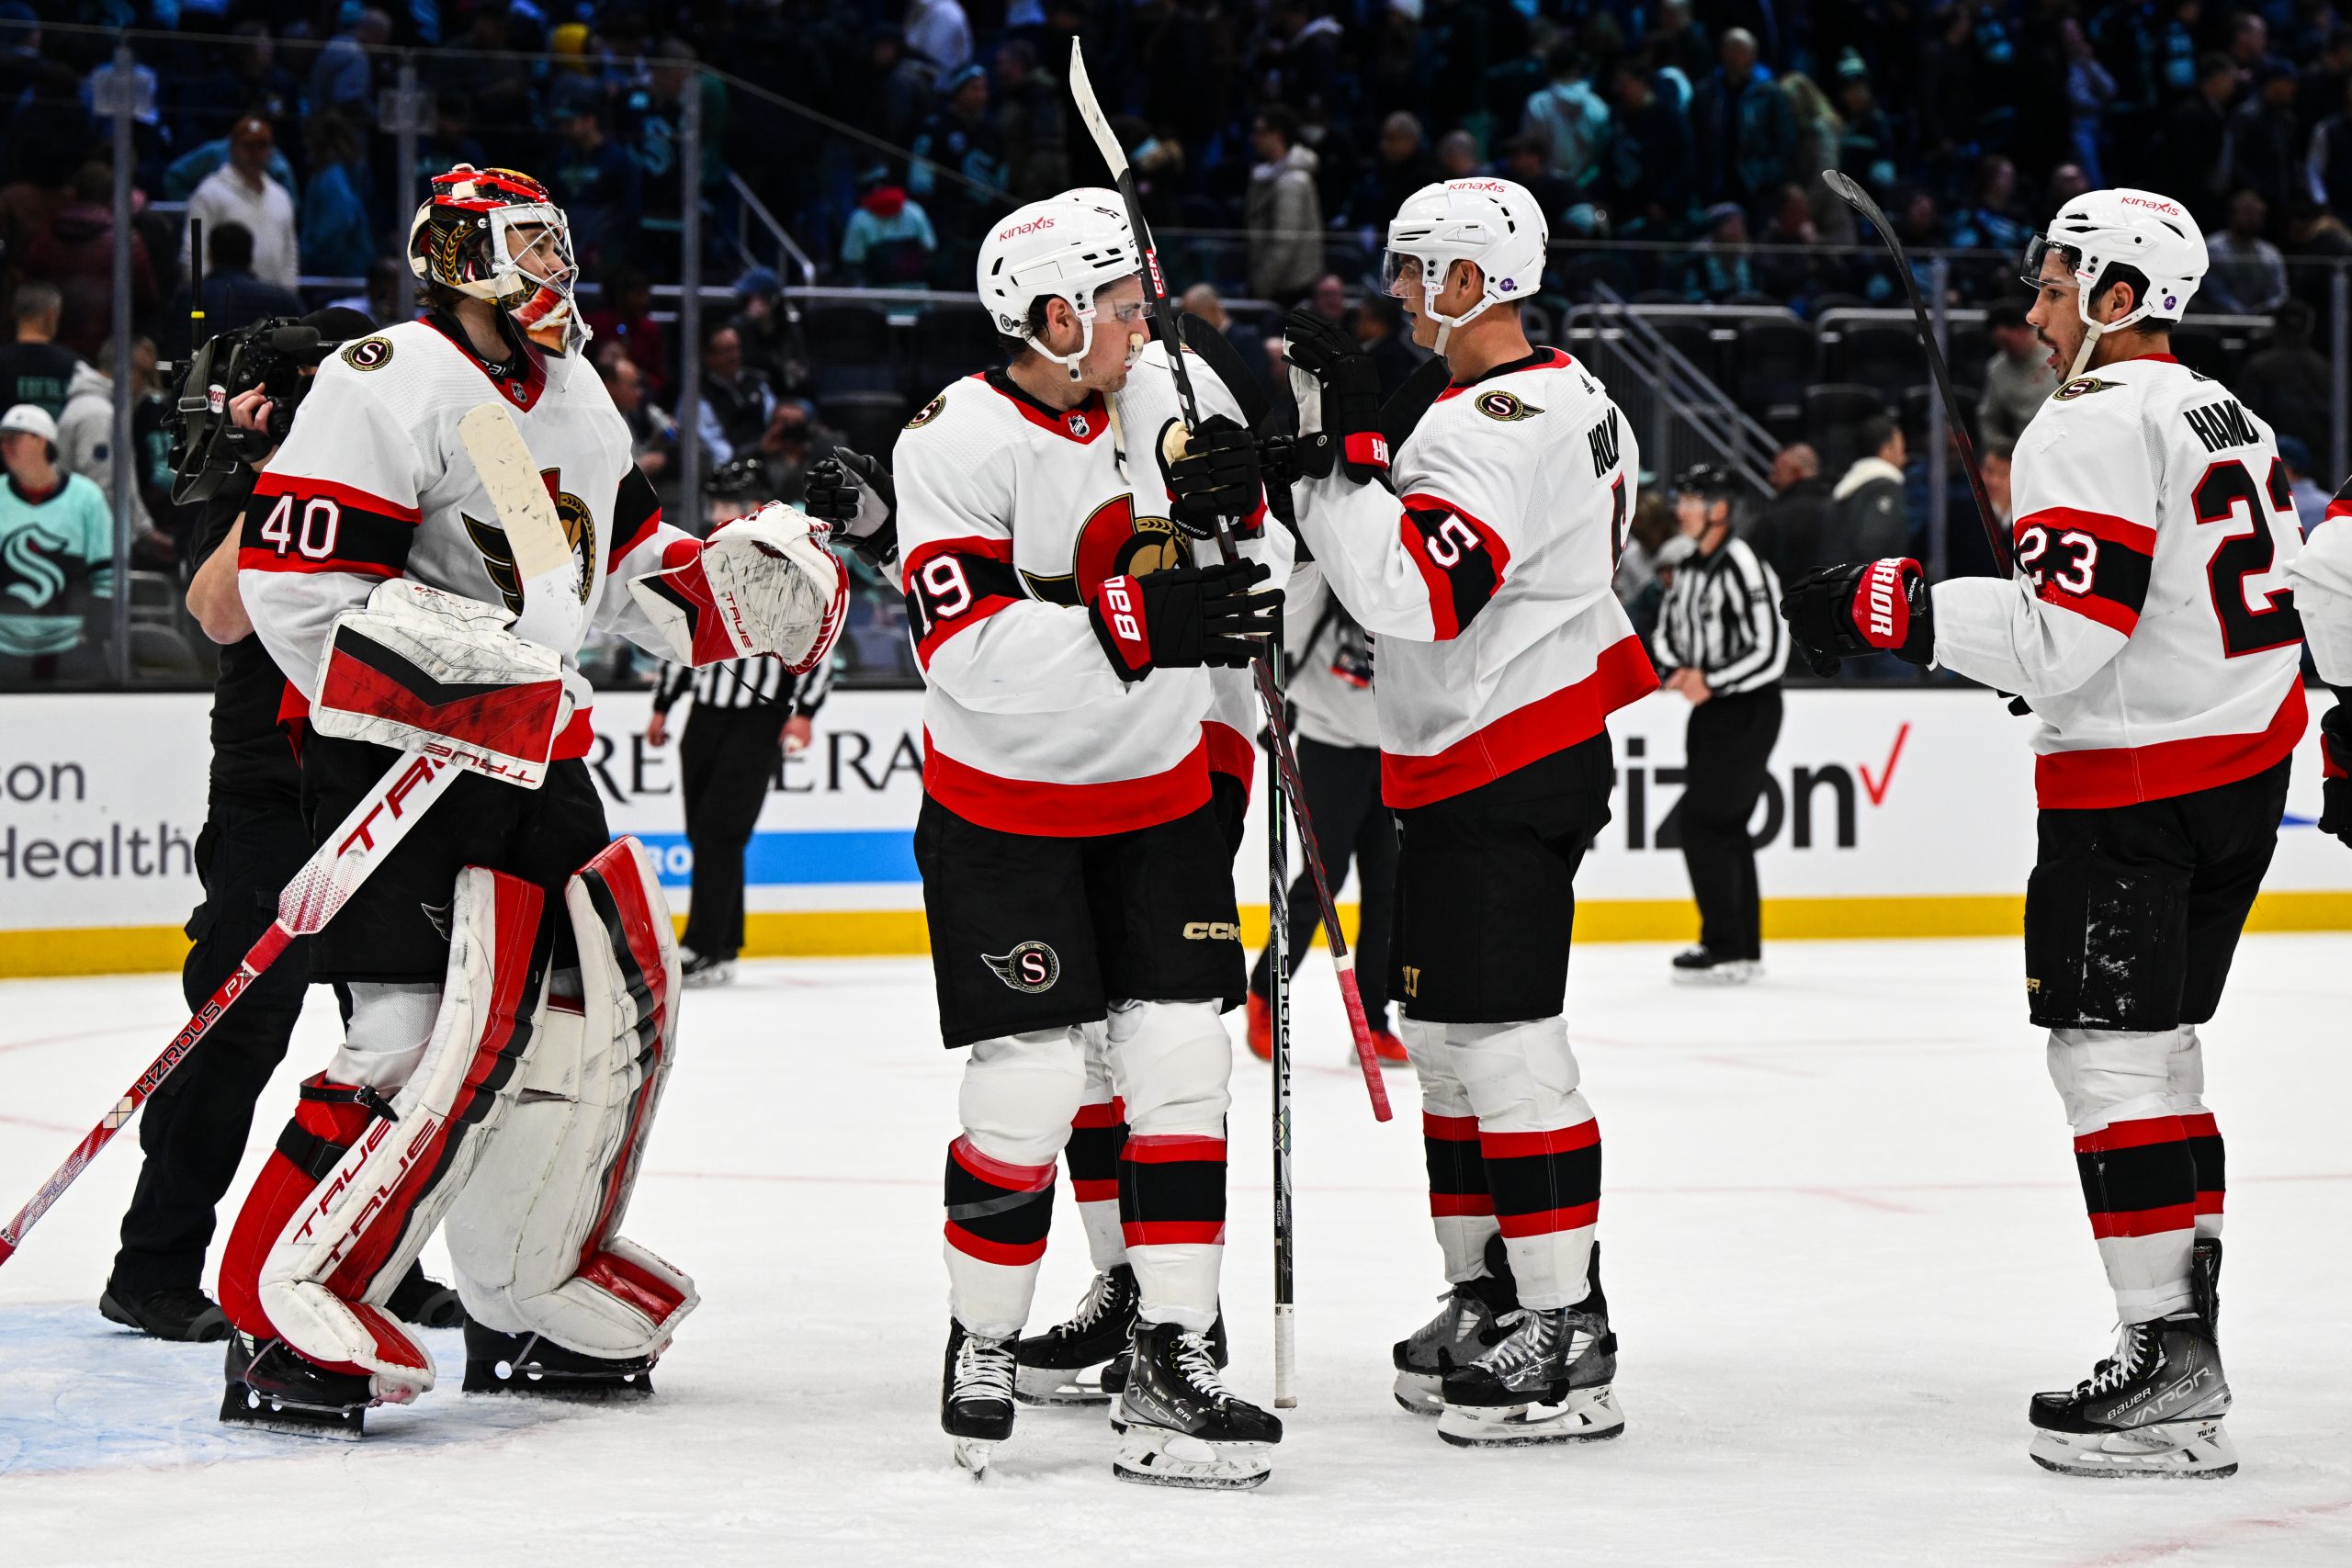 Will New Jersey Devils Or Ottawa Senators Be Better Now And In Future?